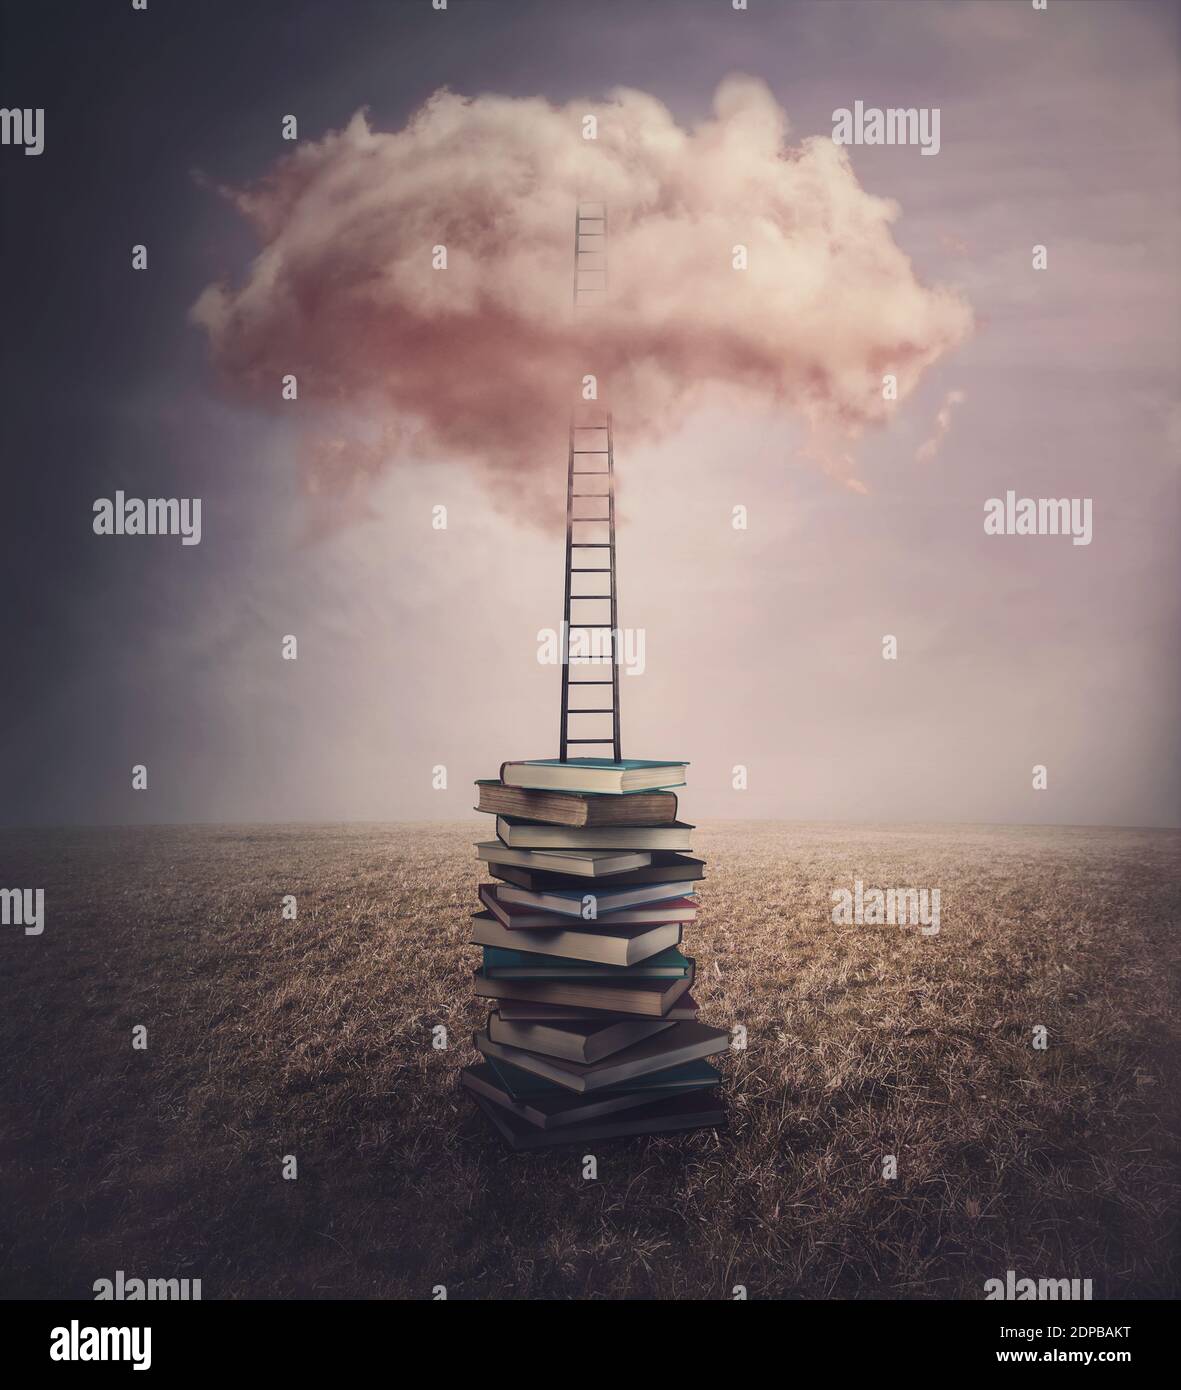 Surreal landscape, conceptual scene with a books pile in the middle of an open meadow, and a ladder or stairway leading up to a pink cloud in the sky. Stock Photo